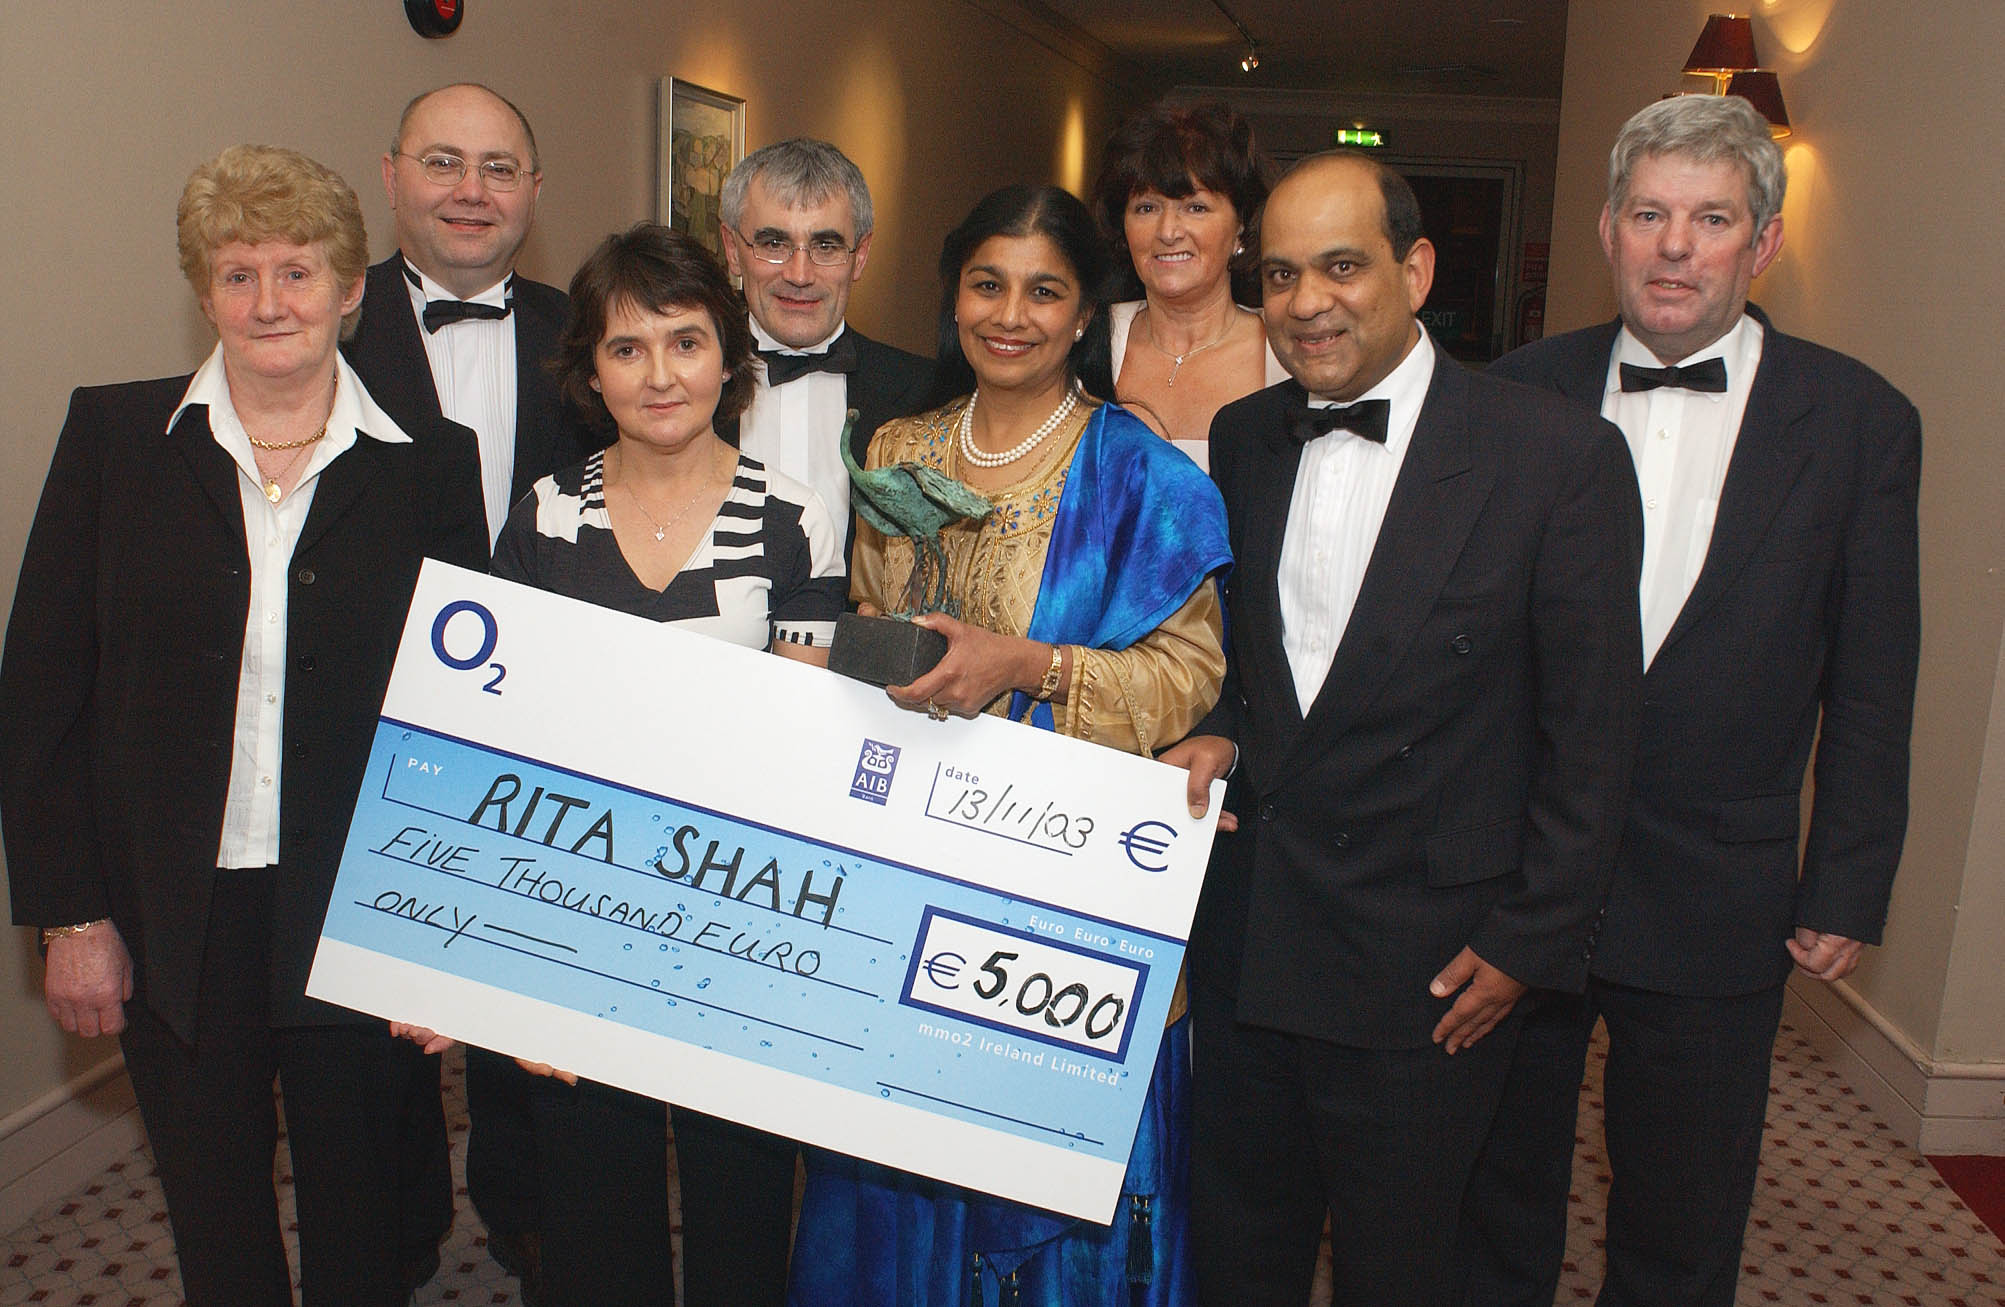 O2 Business Woman of the Year Award